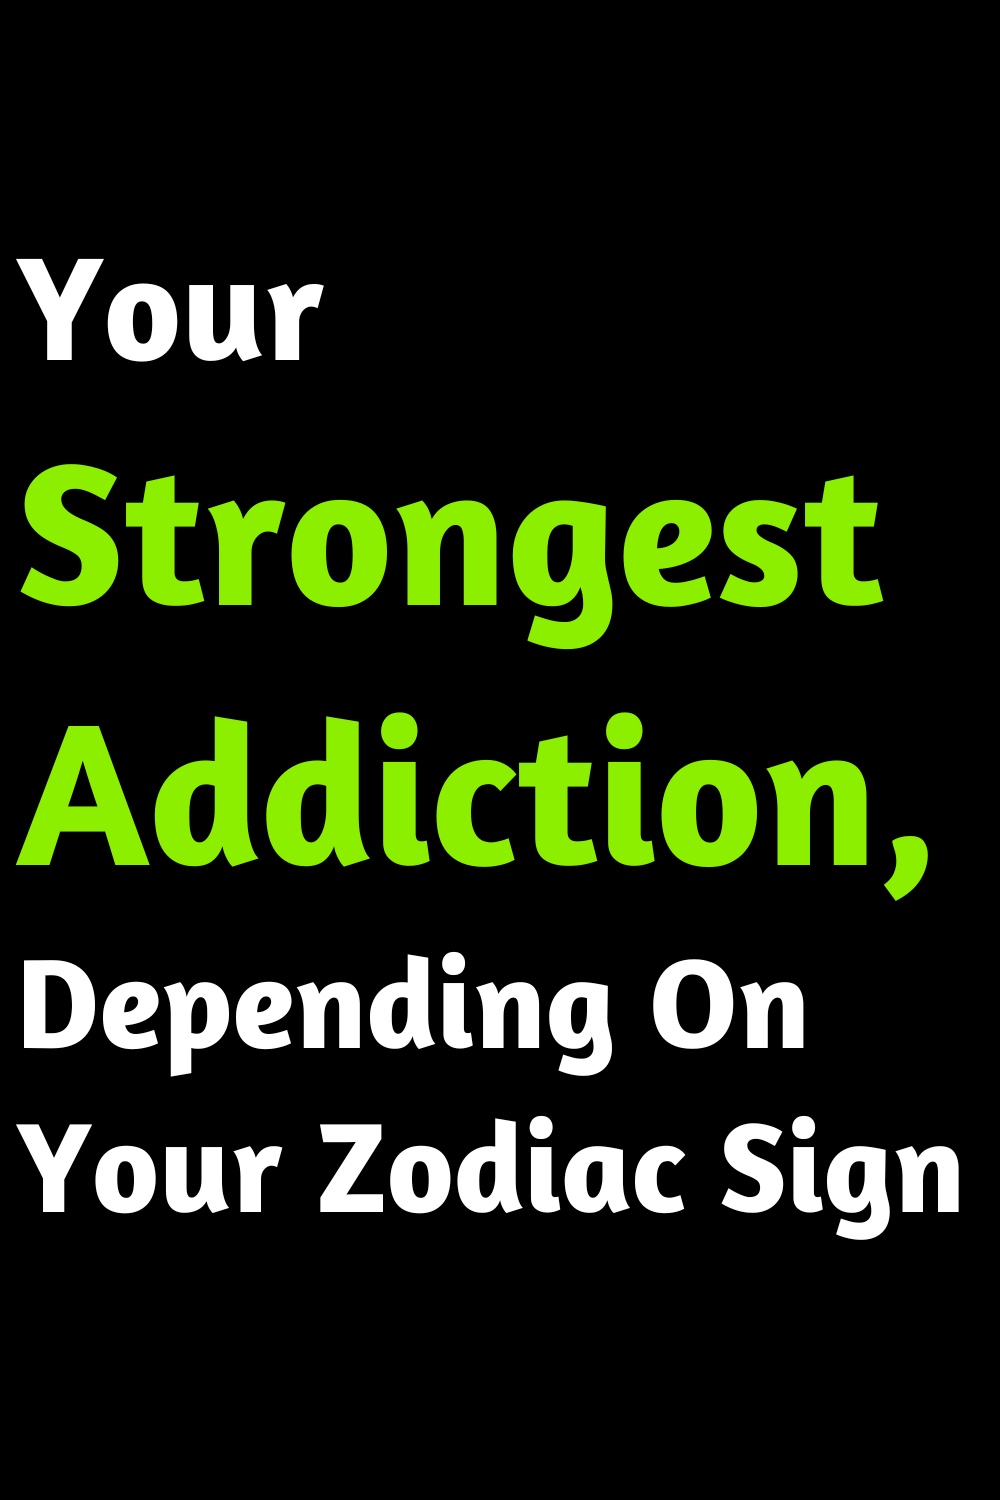 Your Strongest Addiction, Depending On Your Zodiac Sign